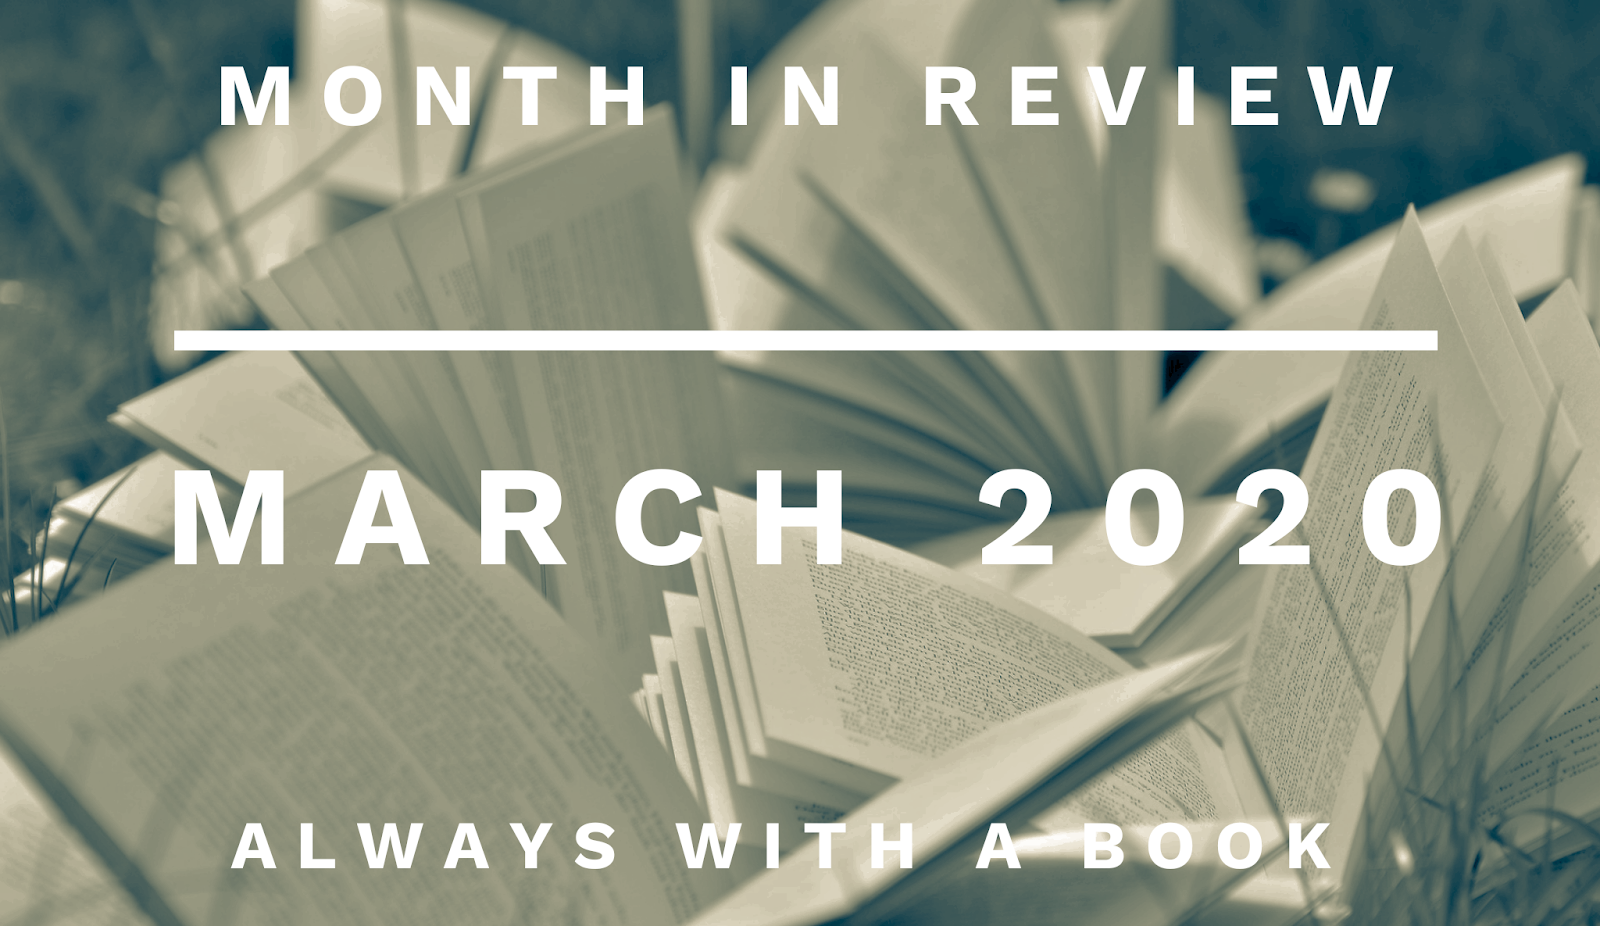 Month in Review: March 2020